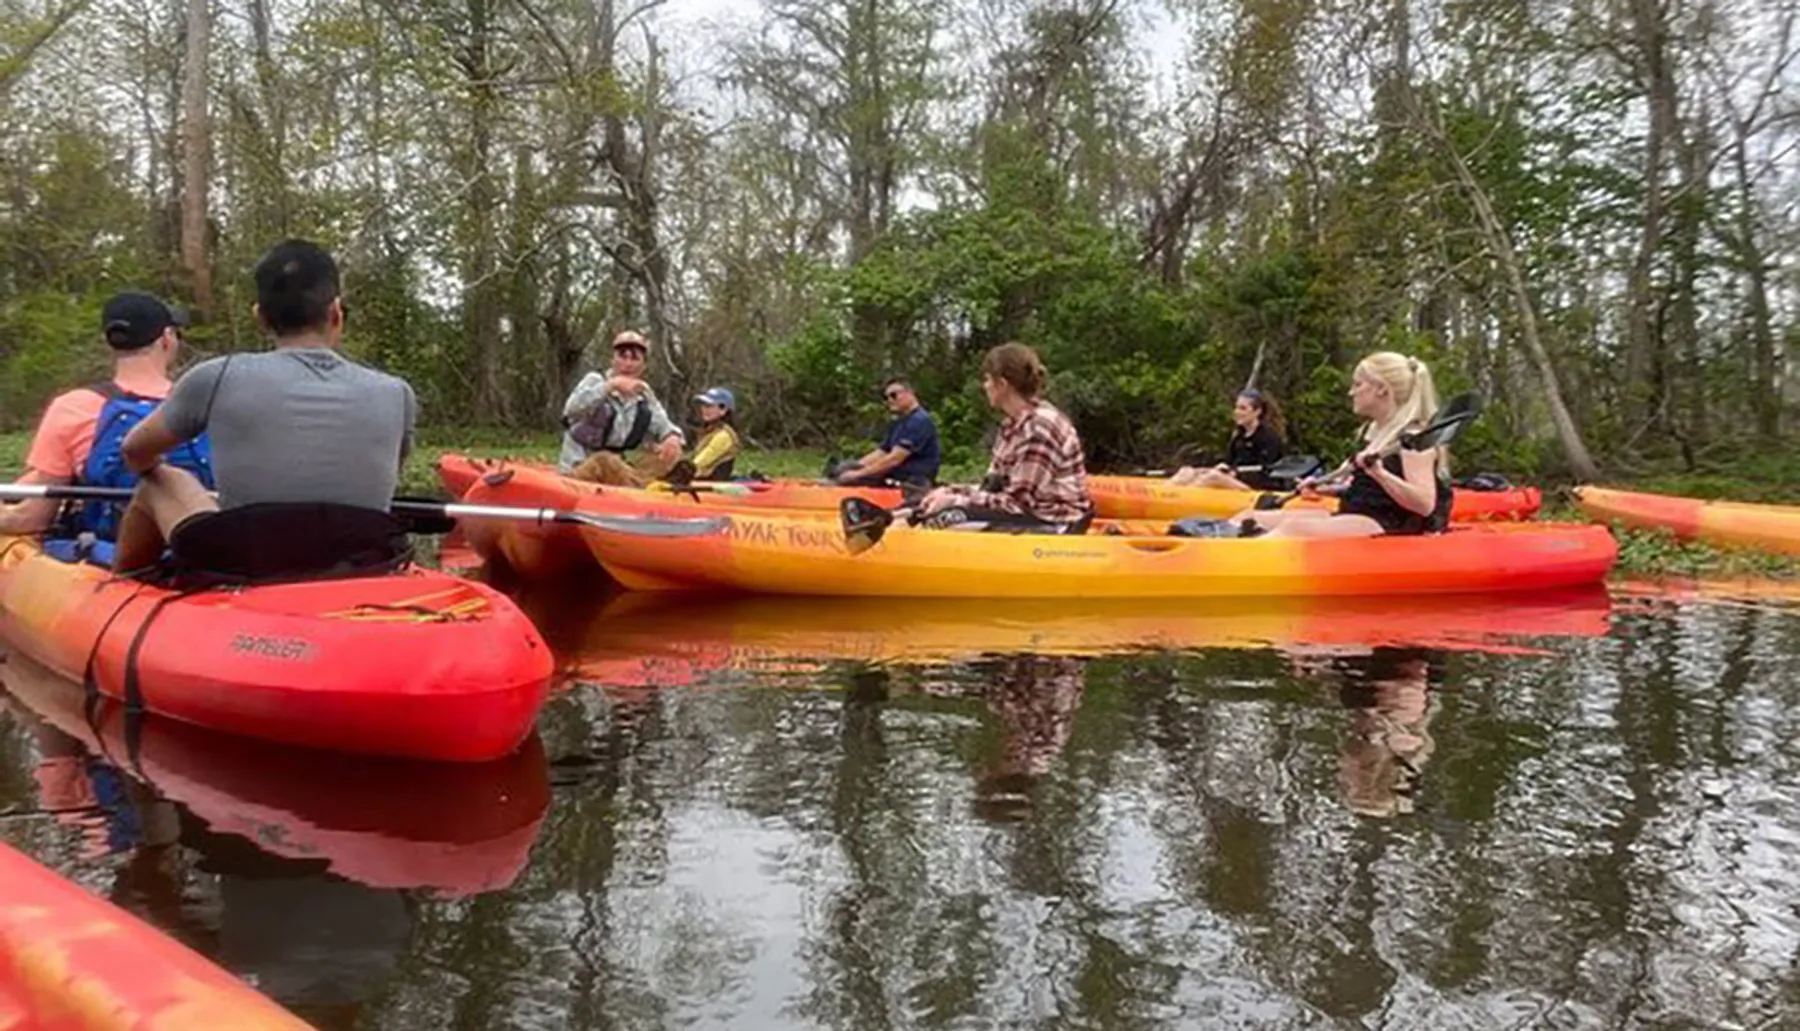 A group of people are enjoying a kayak excursion on a calm waterway surrounded by natural vegetation.